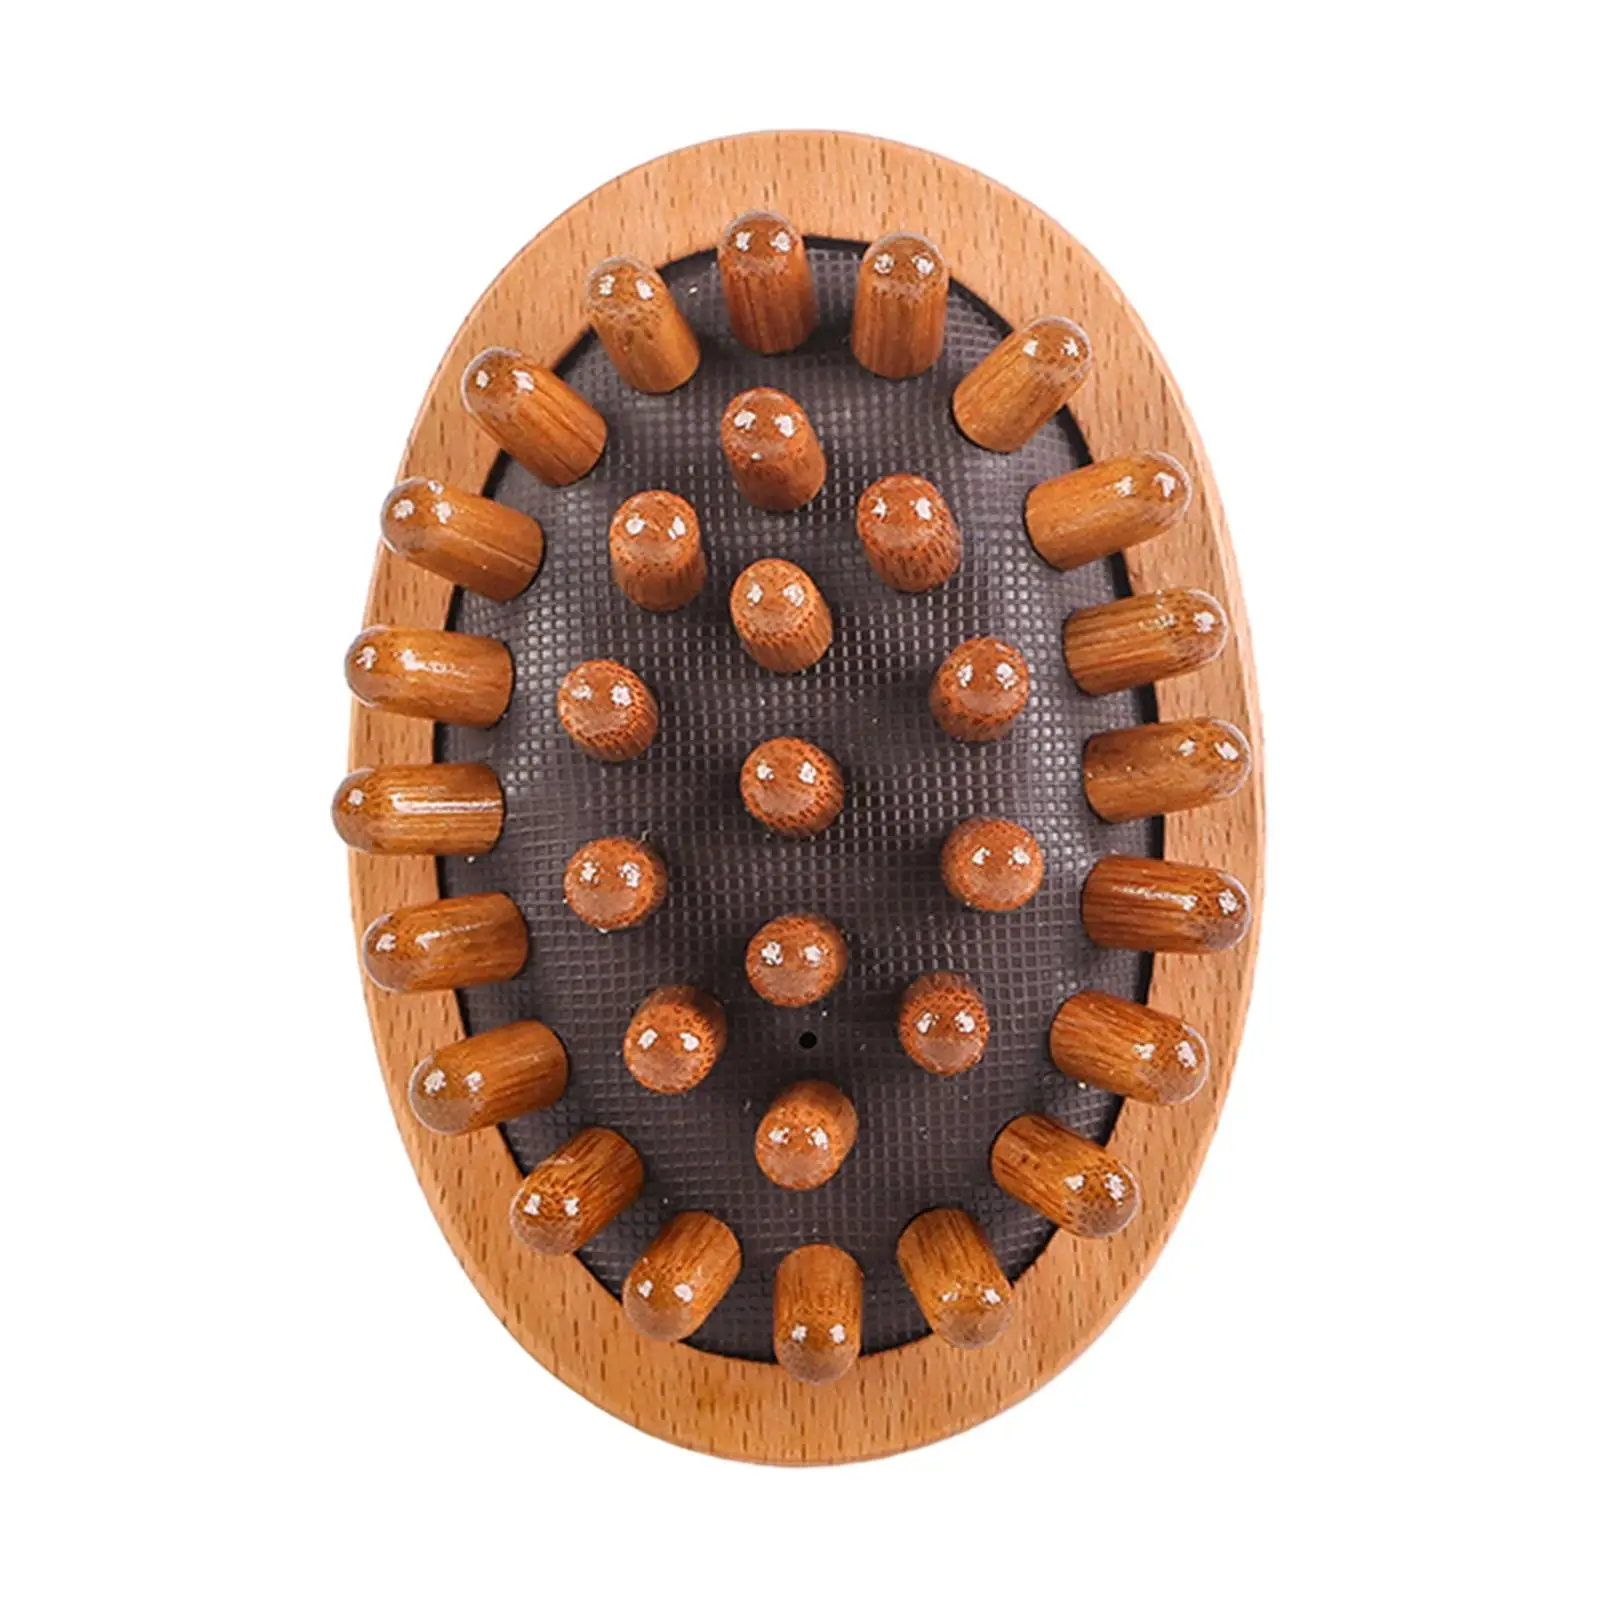 Wooden Massage Body Brush Tool Body Sculpting Tool Muscle Relaxation Handheld Wood Massage Tools for Back Neck Thigh Waist Legs